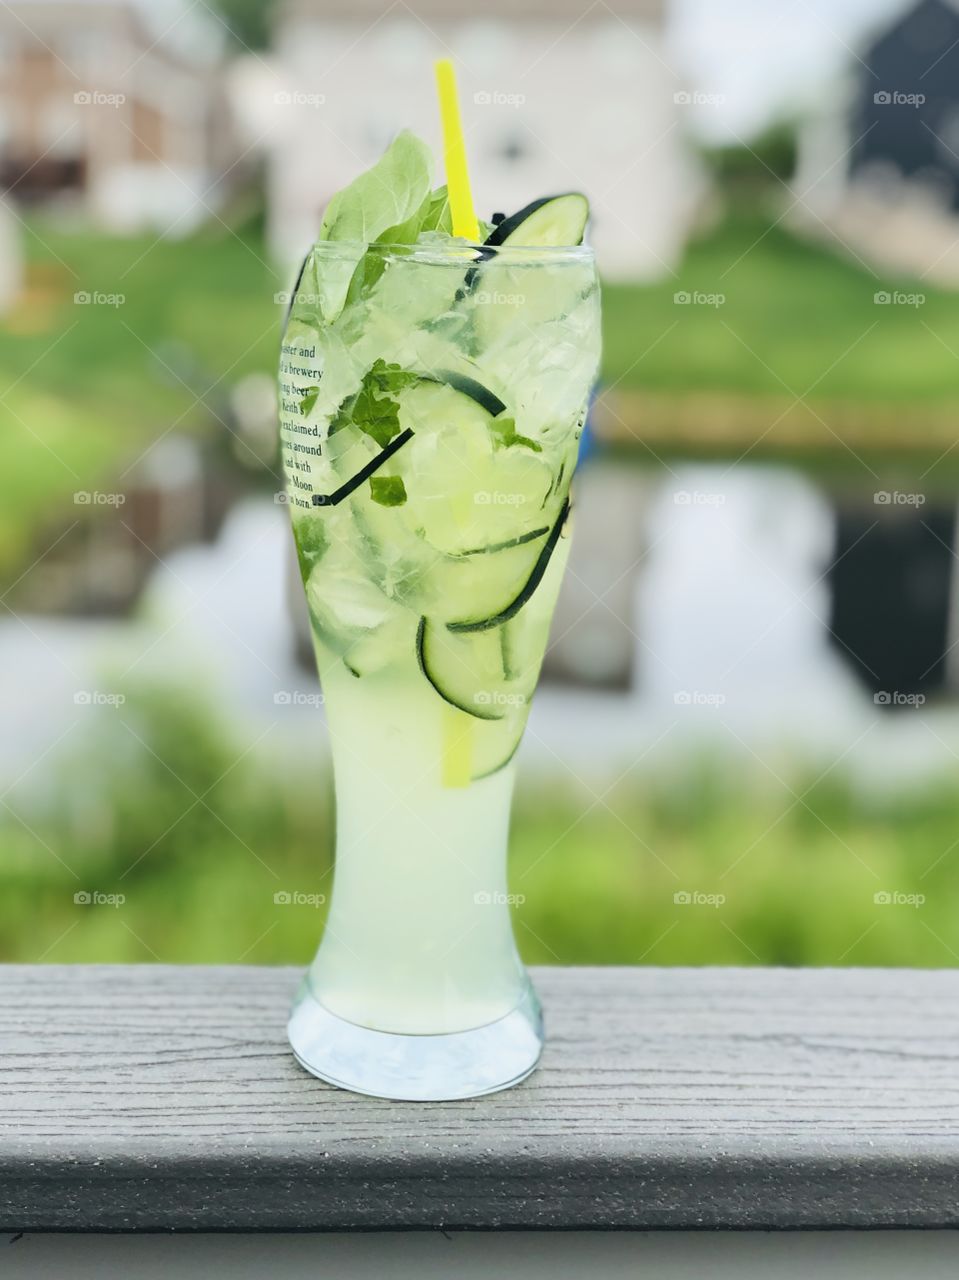 This Aviation Gin cucumber basil smash is so refreshing on a hot summer day. It counts as a side salad, right?